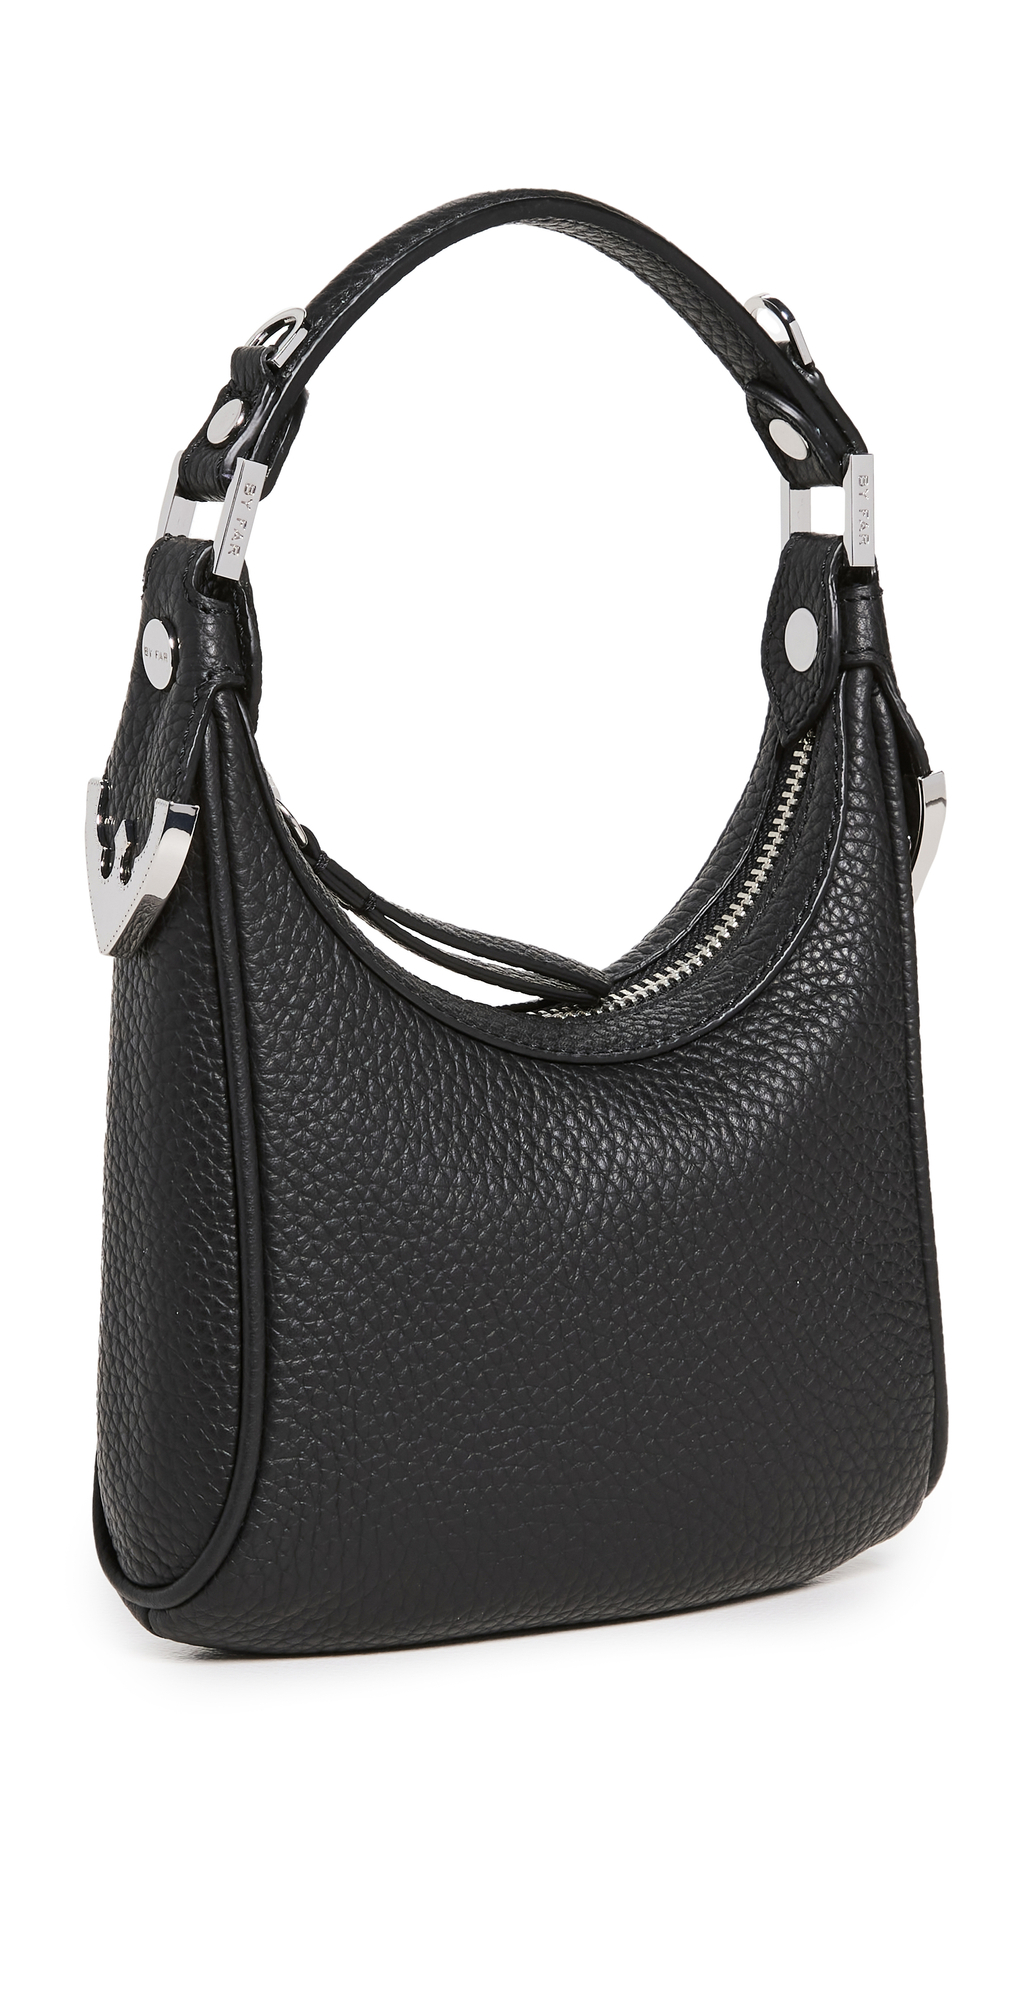 BY FAR Cosmo Black Flat Grain Leather Bag